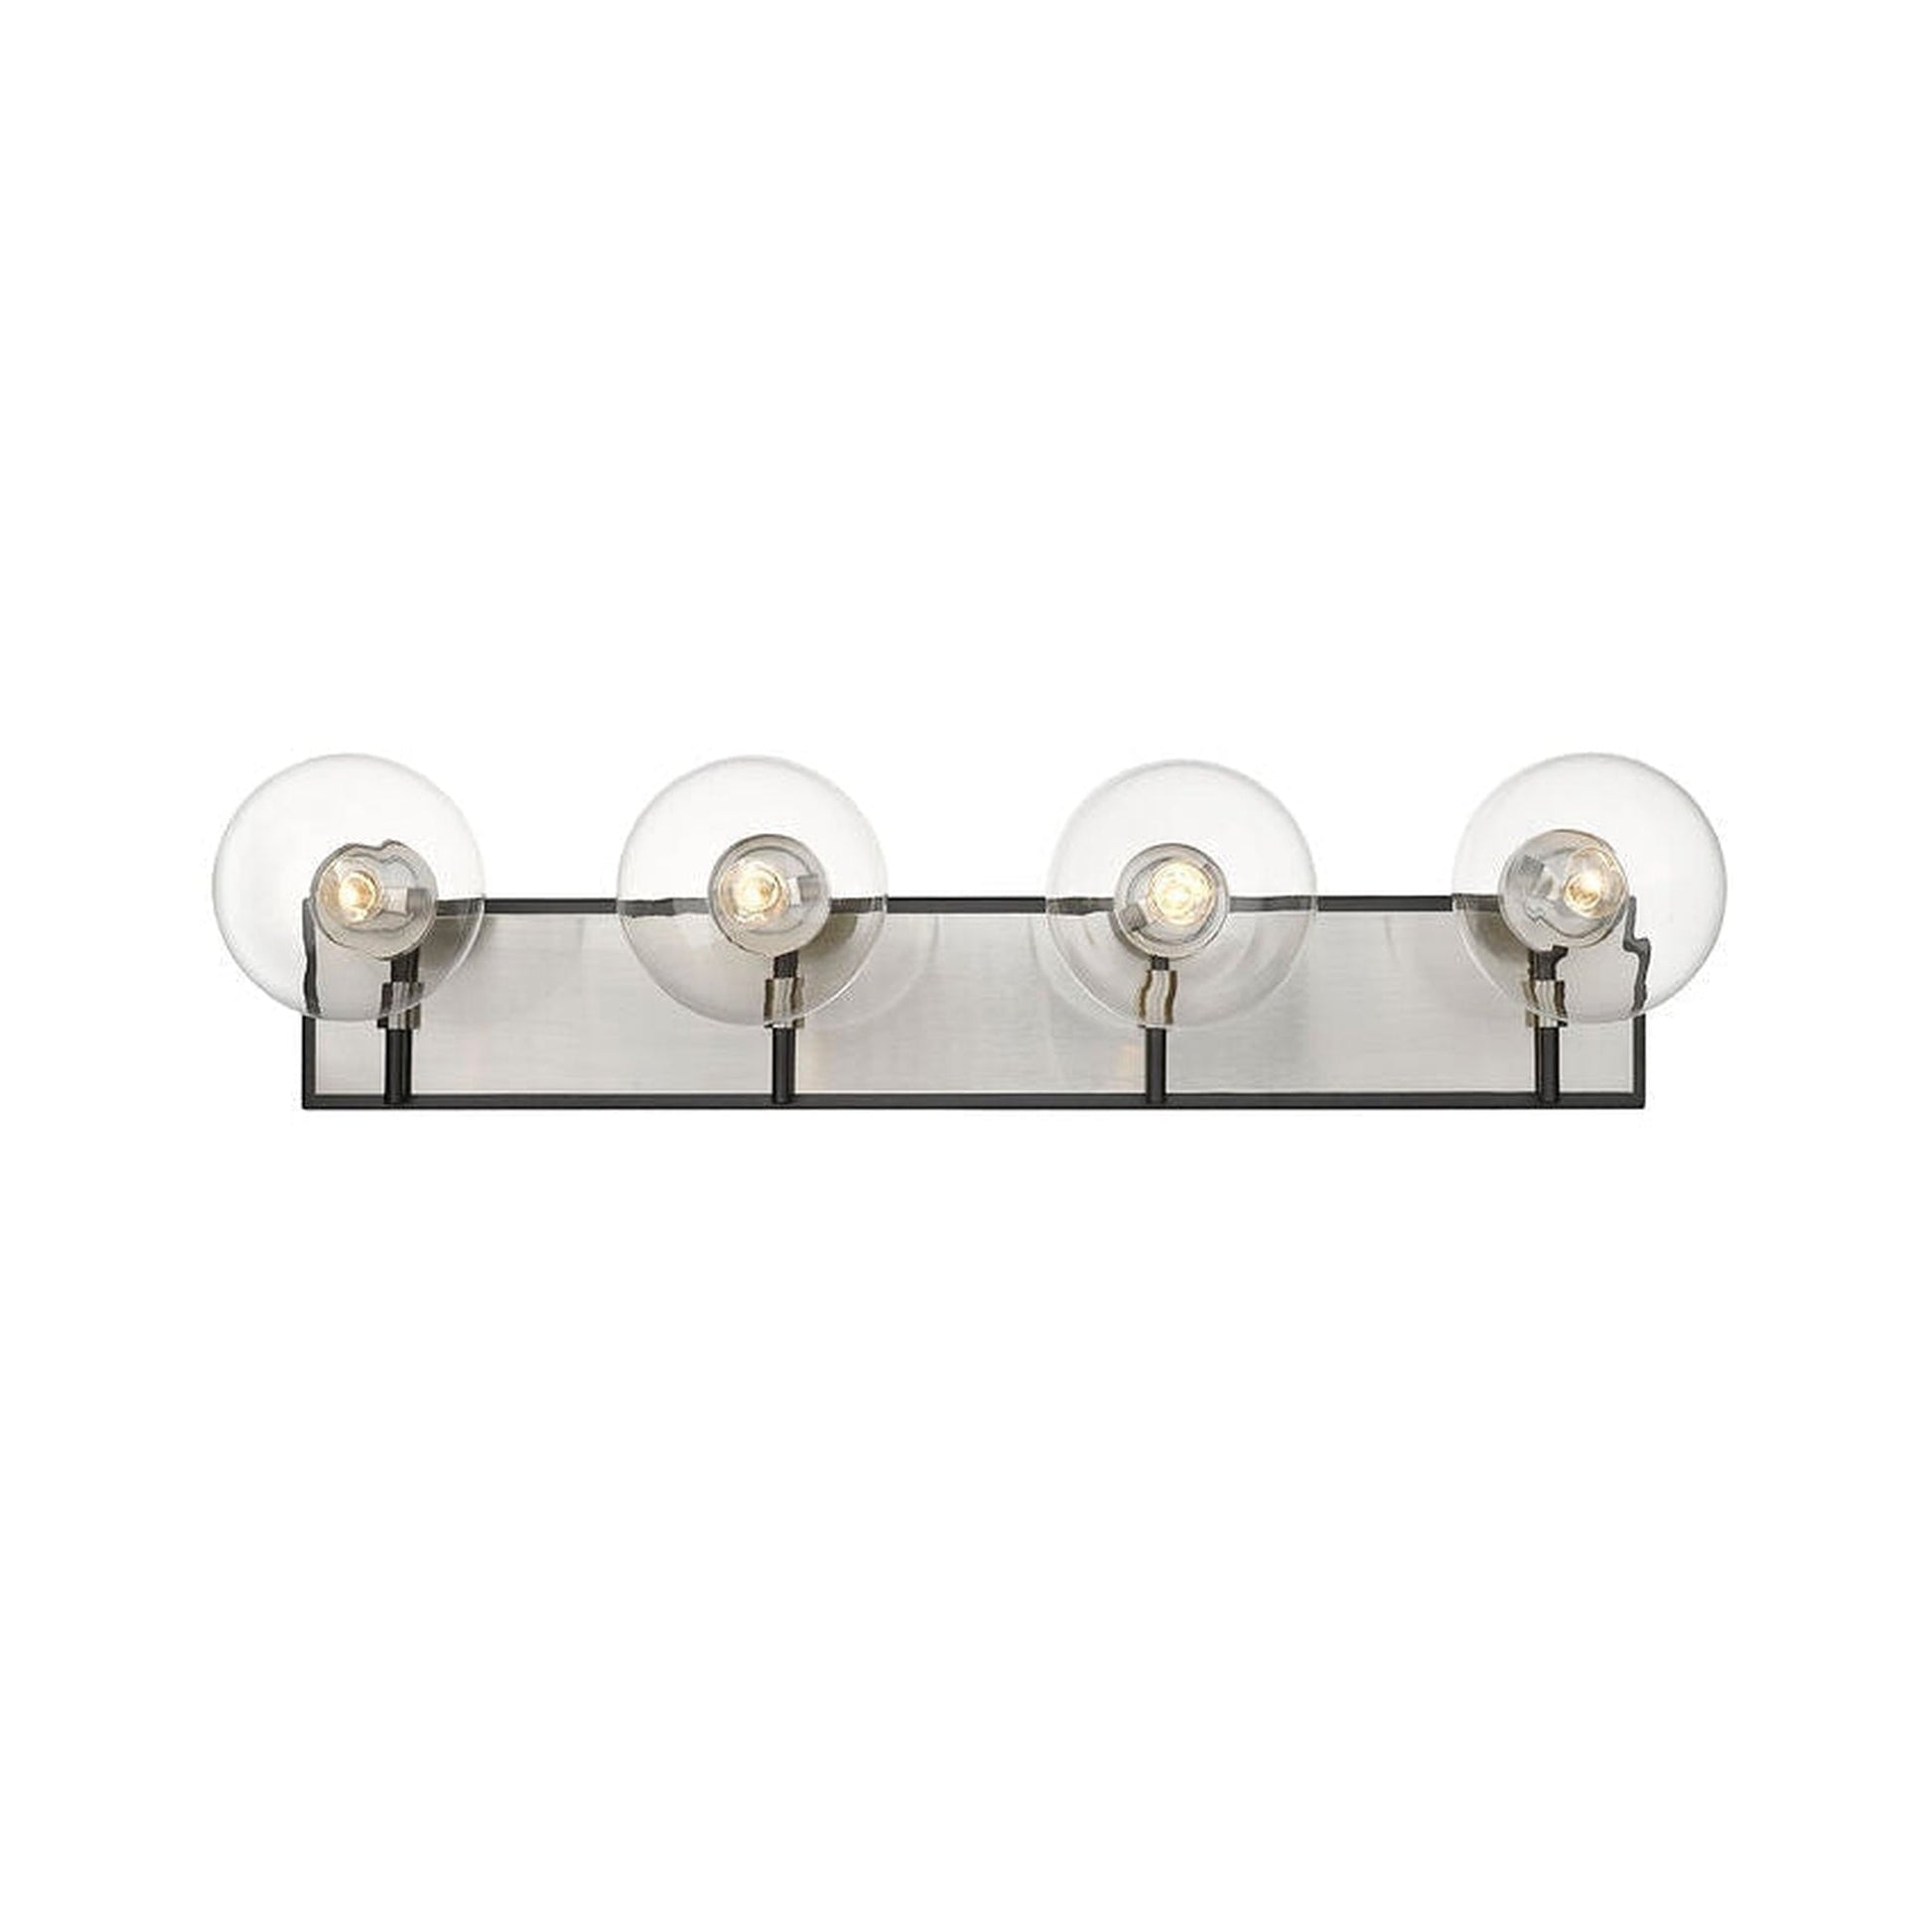 Z-Lite Parsons 33" 4-Light Matte Black and Brushed Nickel Vanity Light With Clear Glass Shade